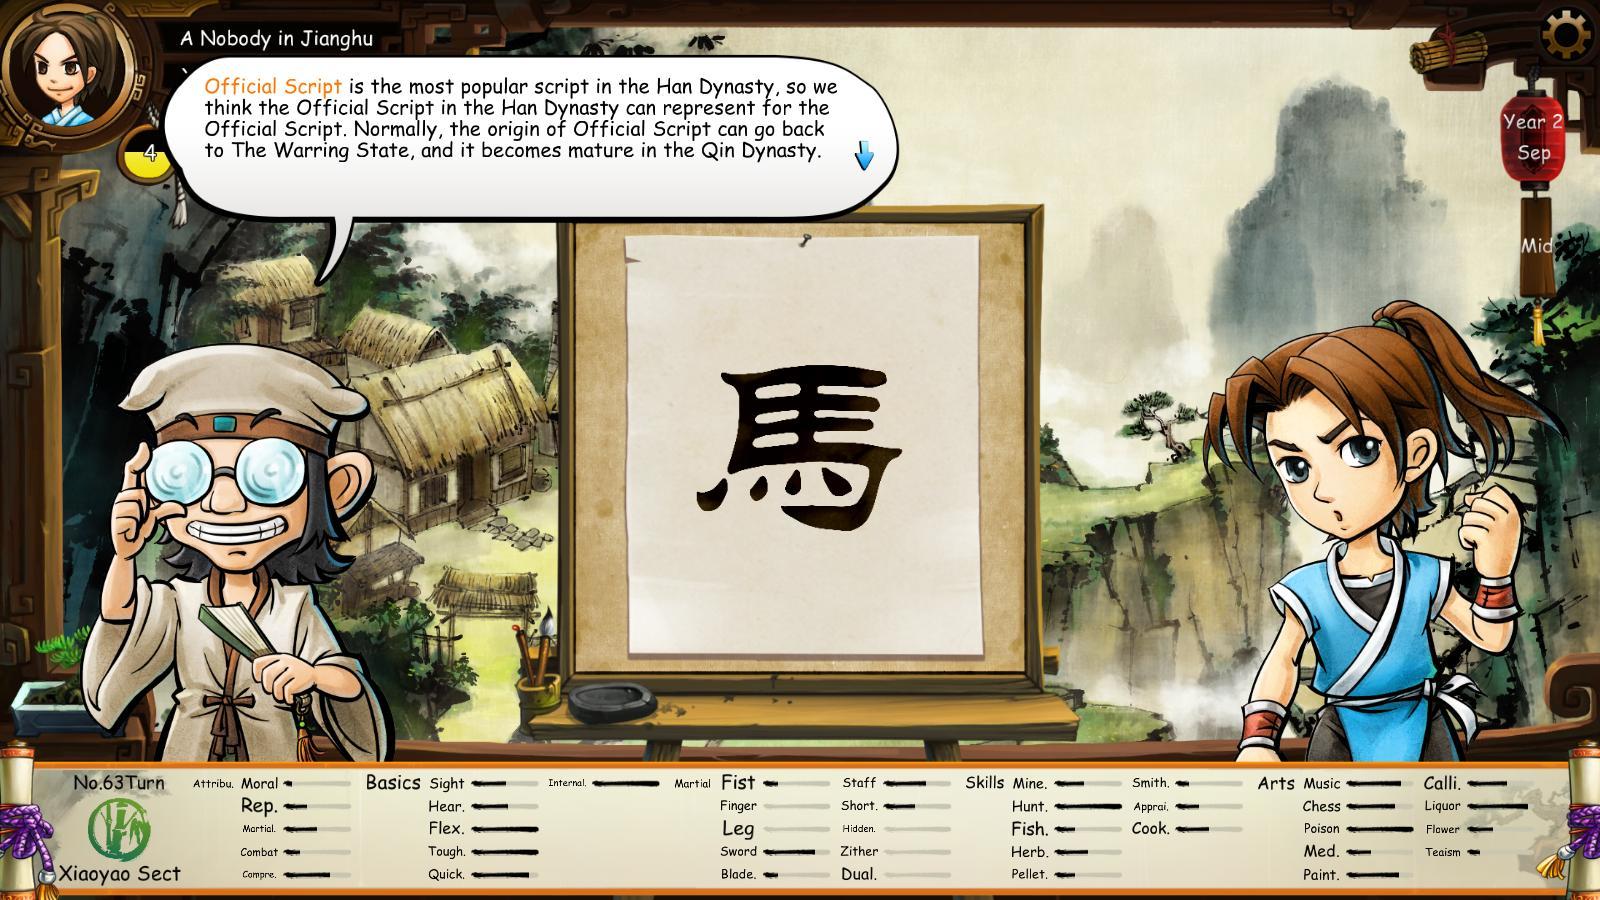 Screenshot of 侠客风云传(Tale of Wuxia)